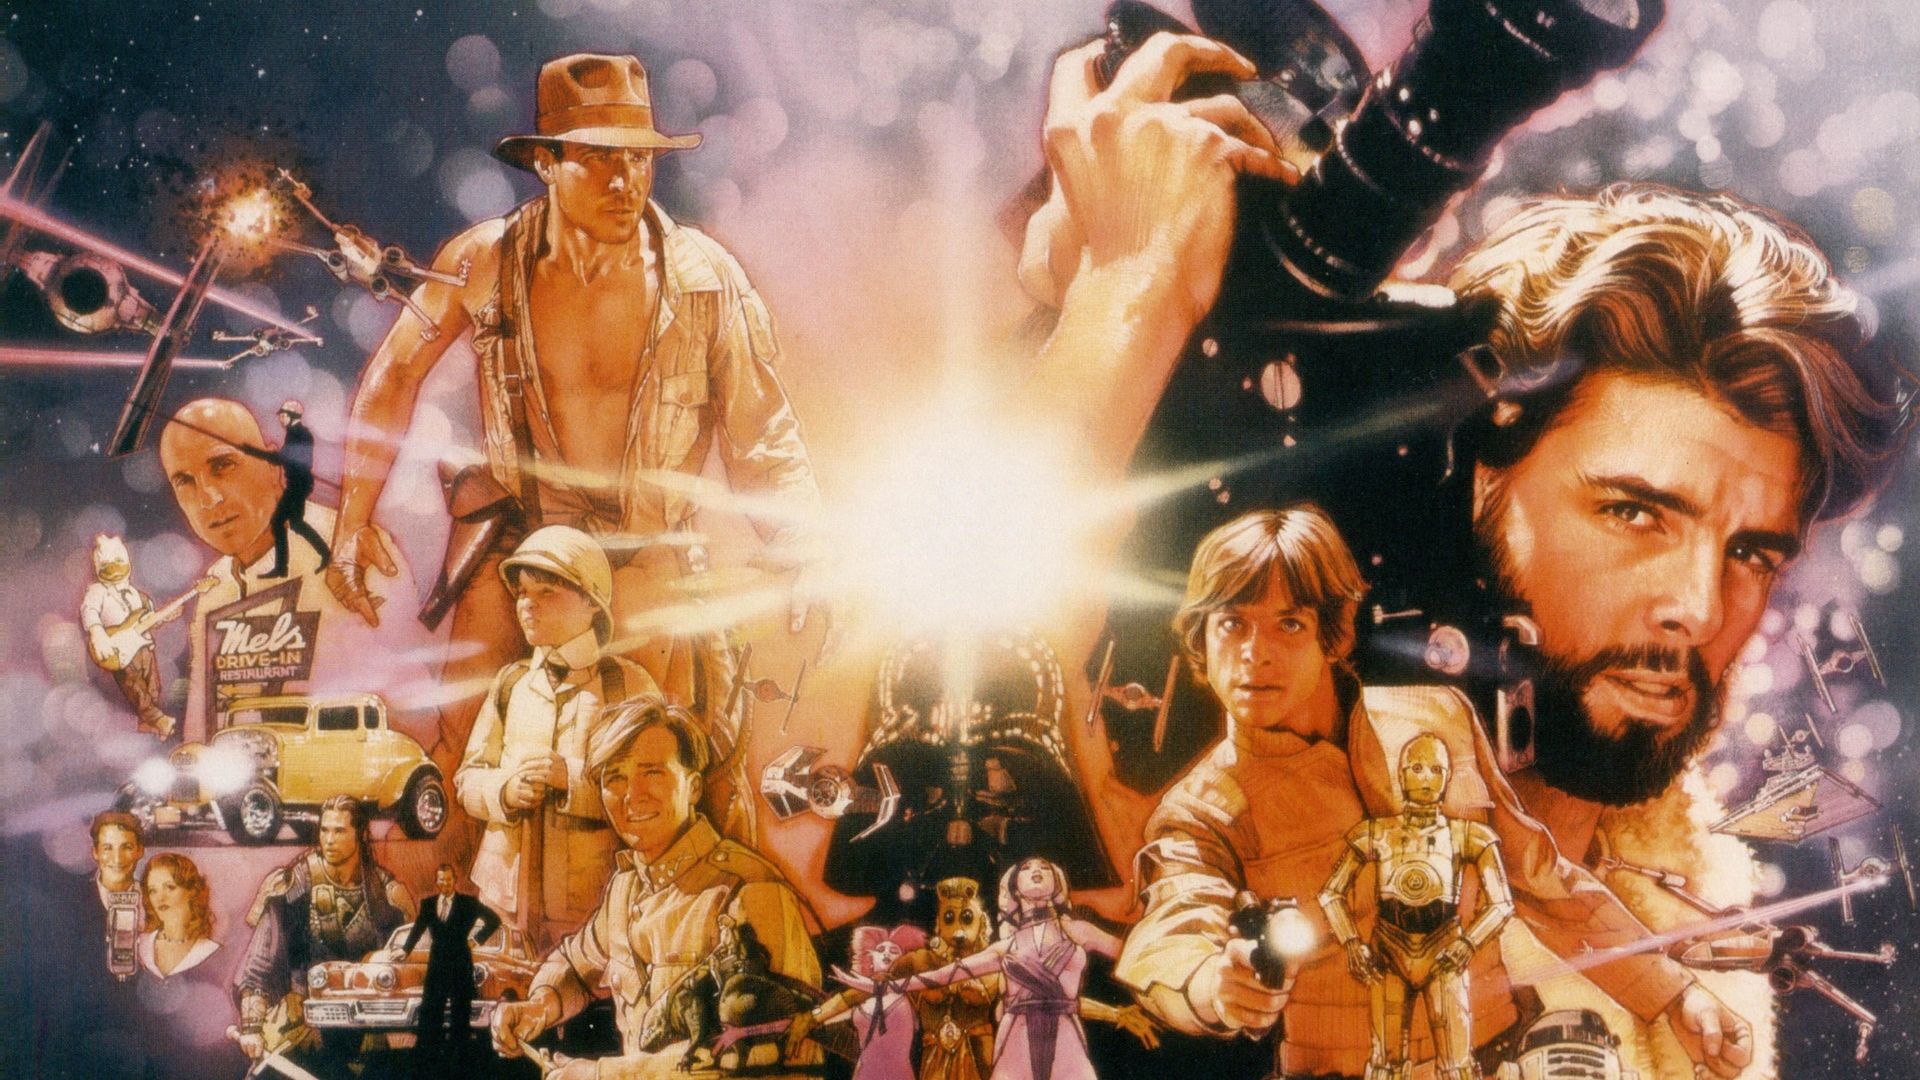 Empire of Dreams: The Story of the 'Star Wars' Trilogy background